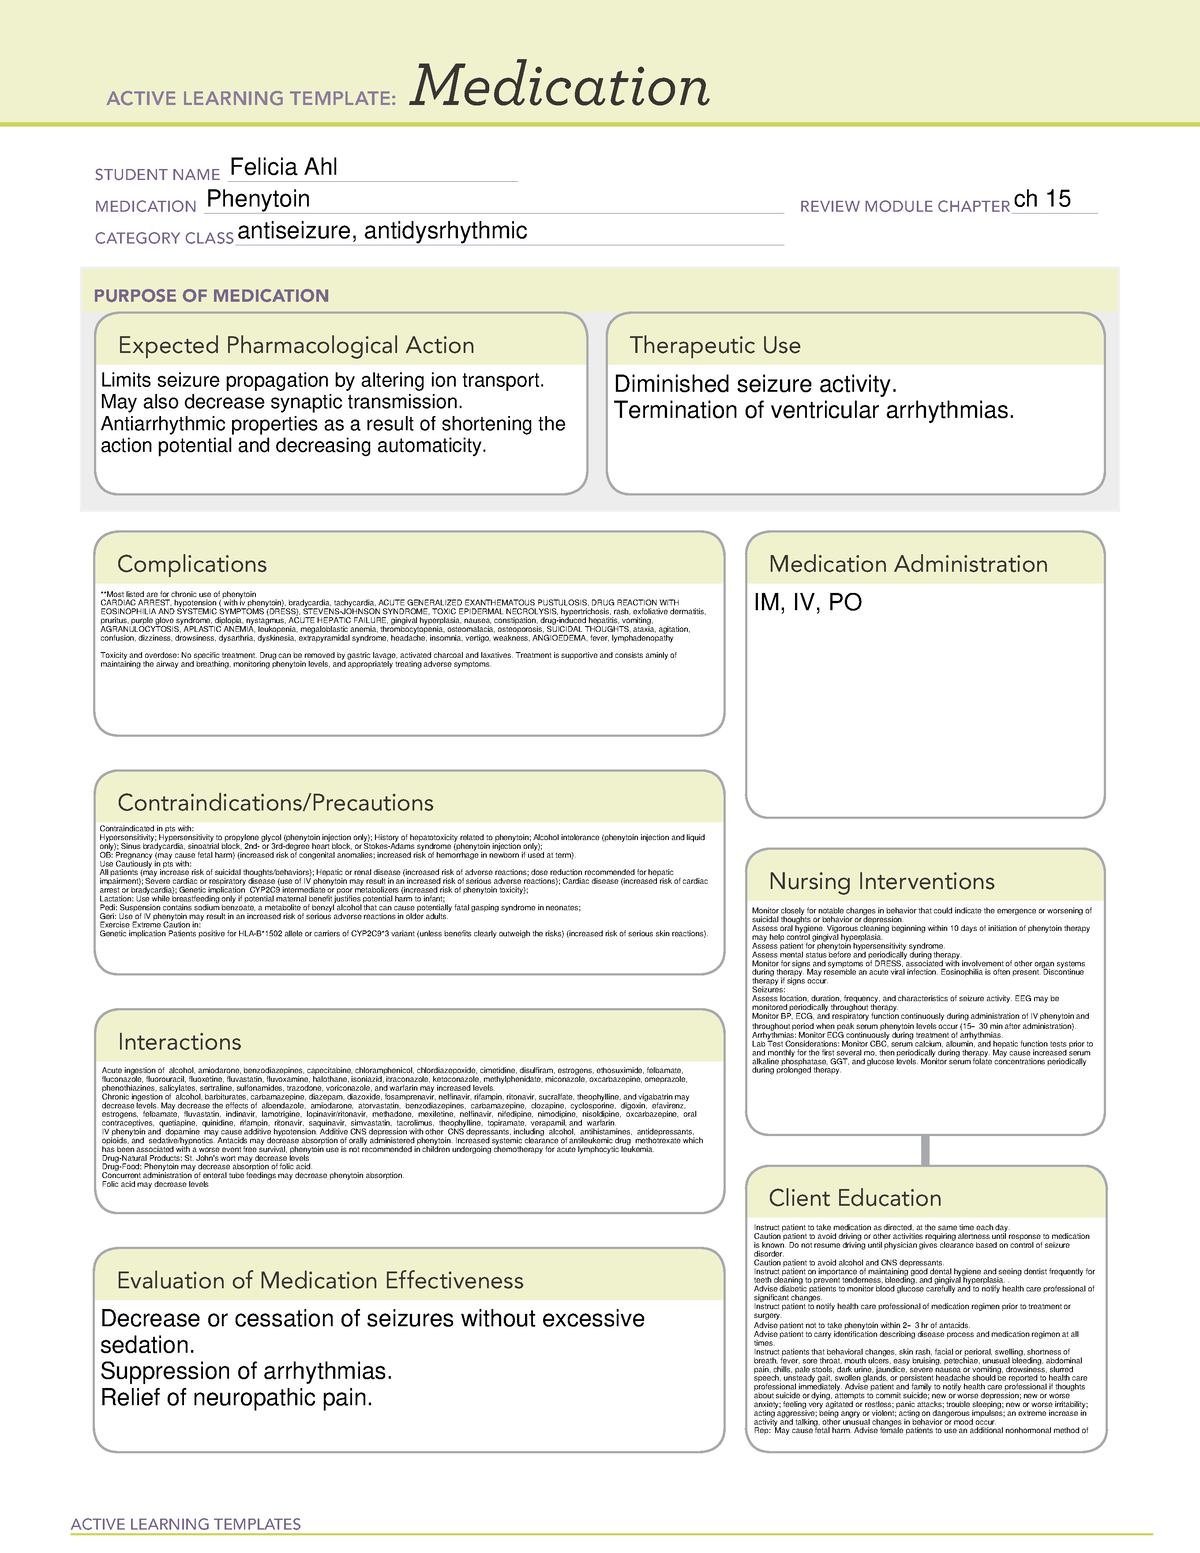 phenytoin-drug-cards-active-learning-templates-medication-student-name-studocu